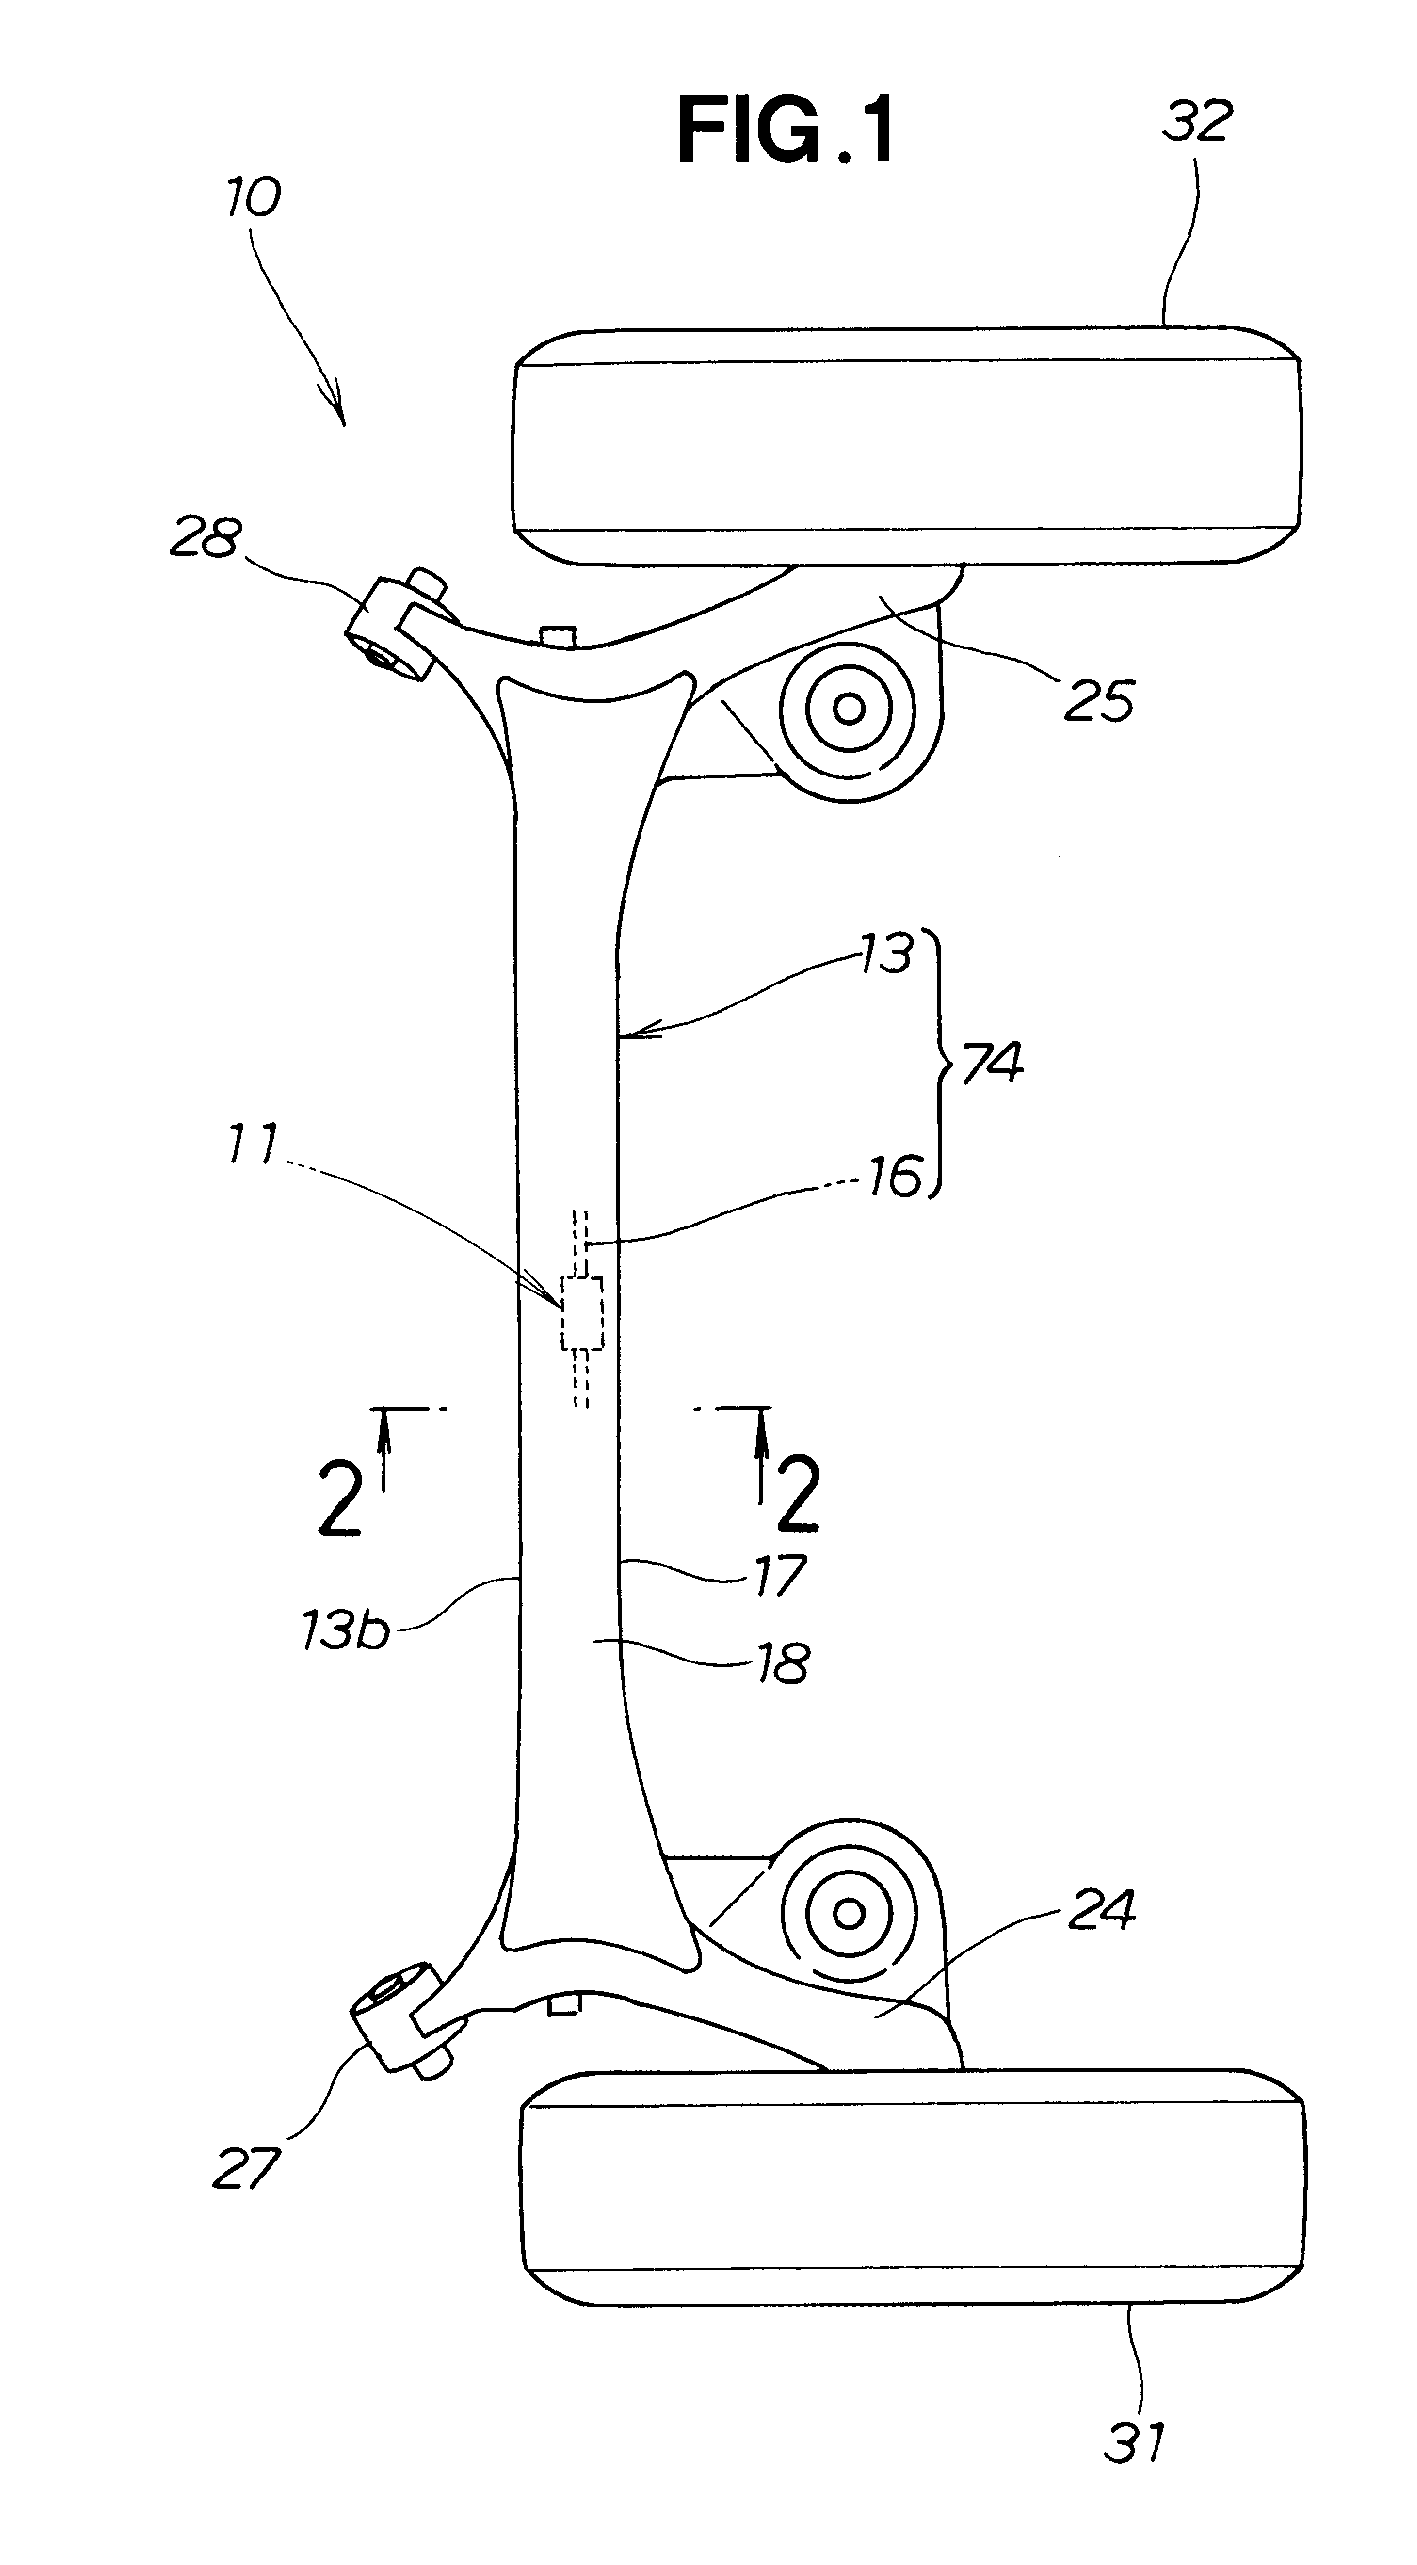 Bush for isolating stabilizer from vibration